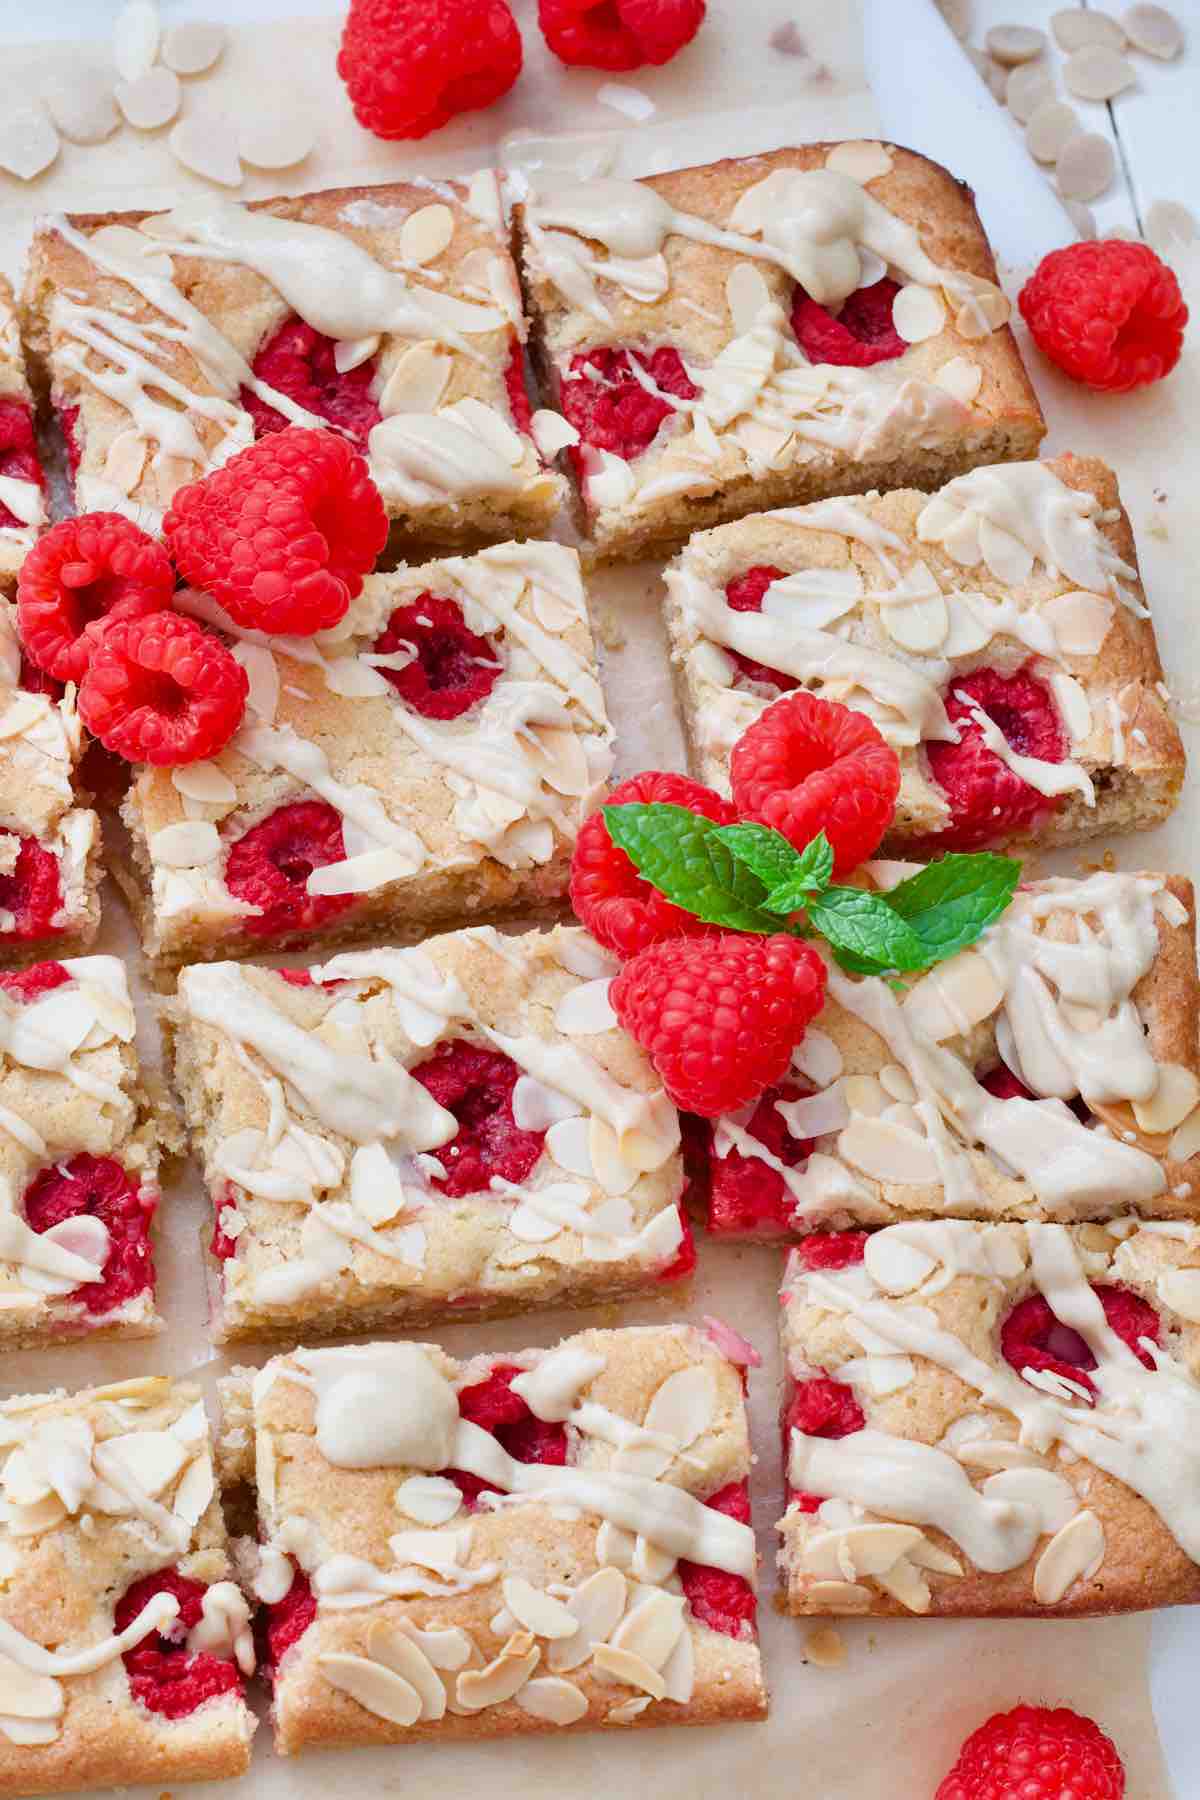 8 raspberry blondies decorated with fresh raspberries and some mint.